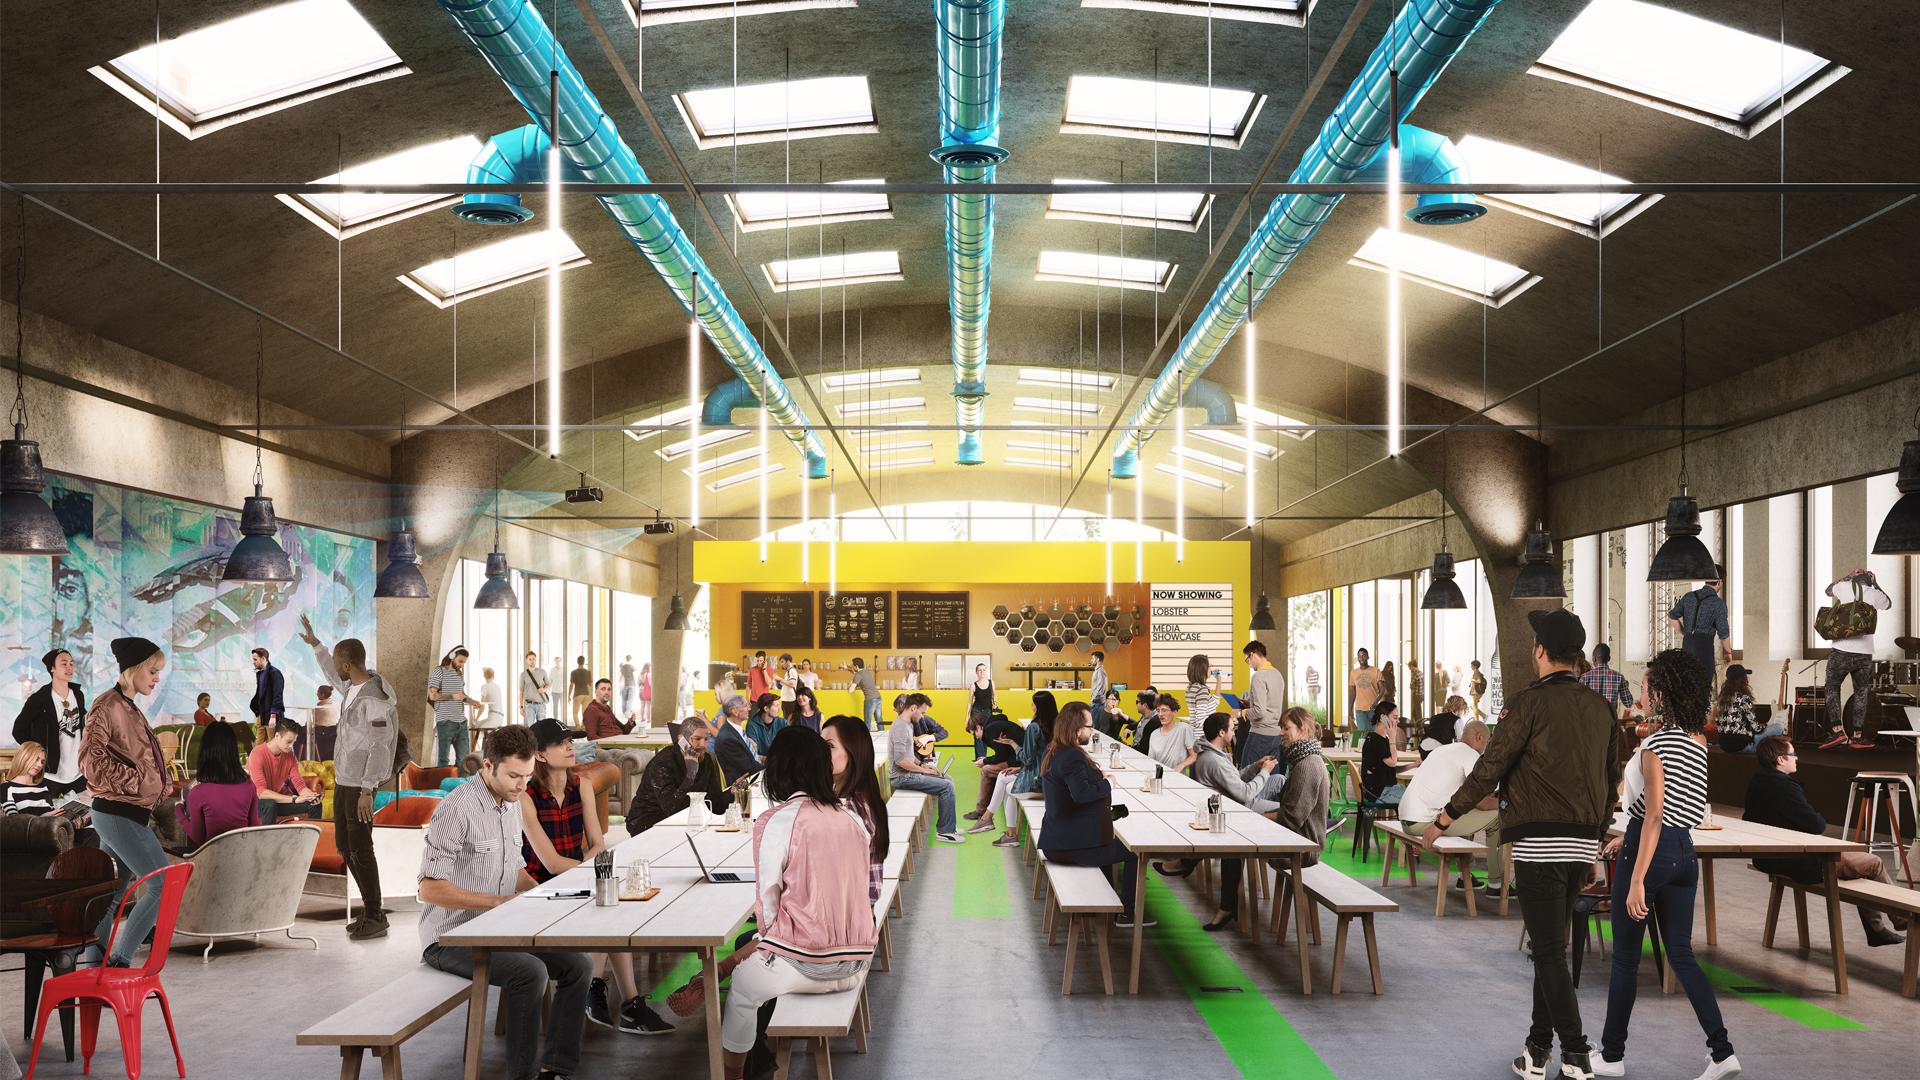 CGI image of lots of people in a large modern foodhall that is brightly lit